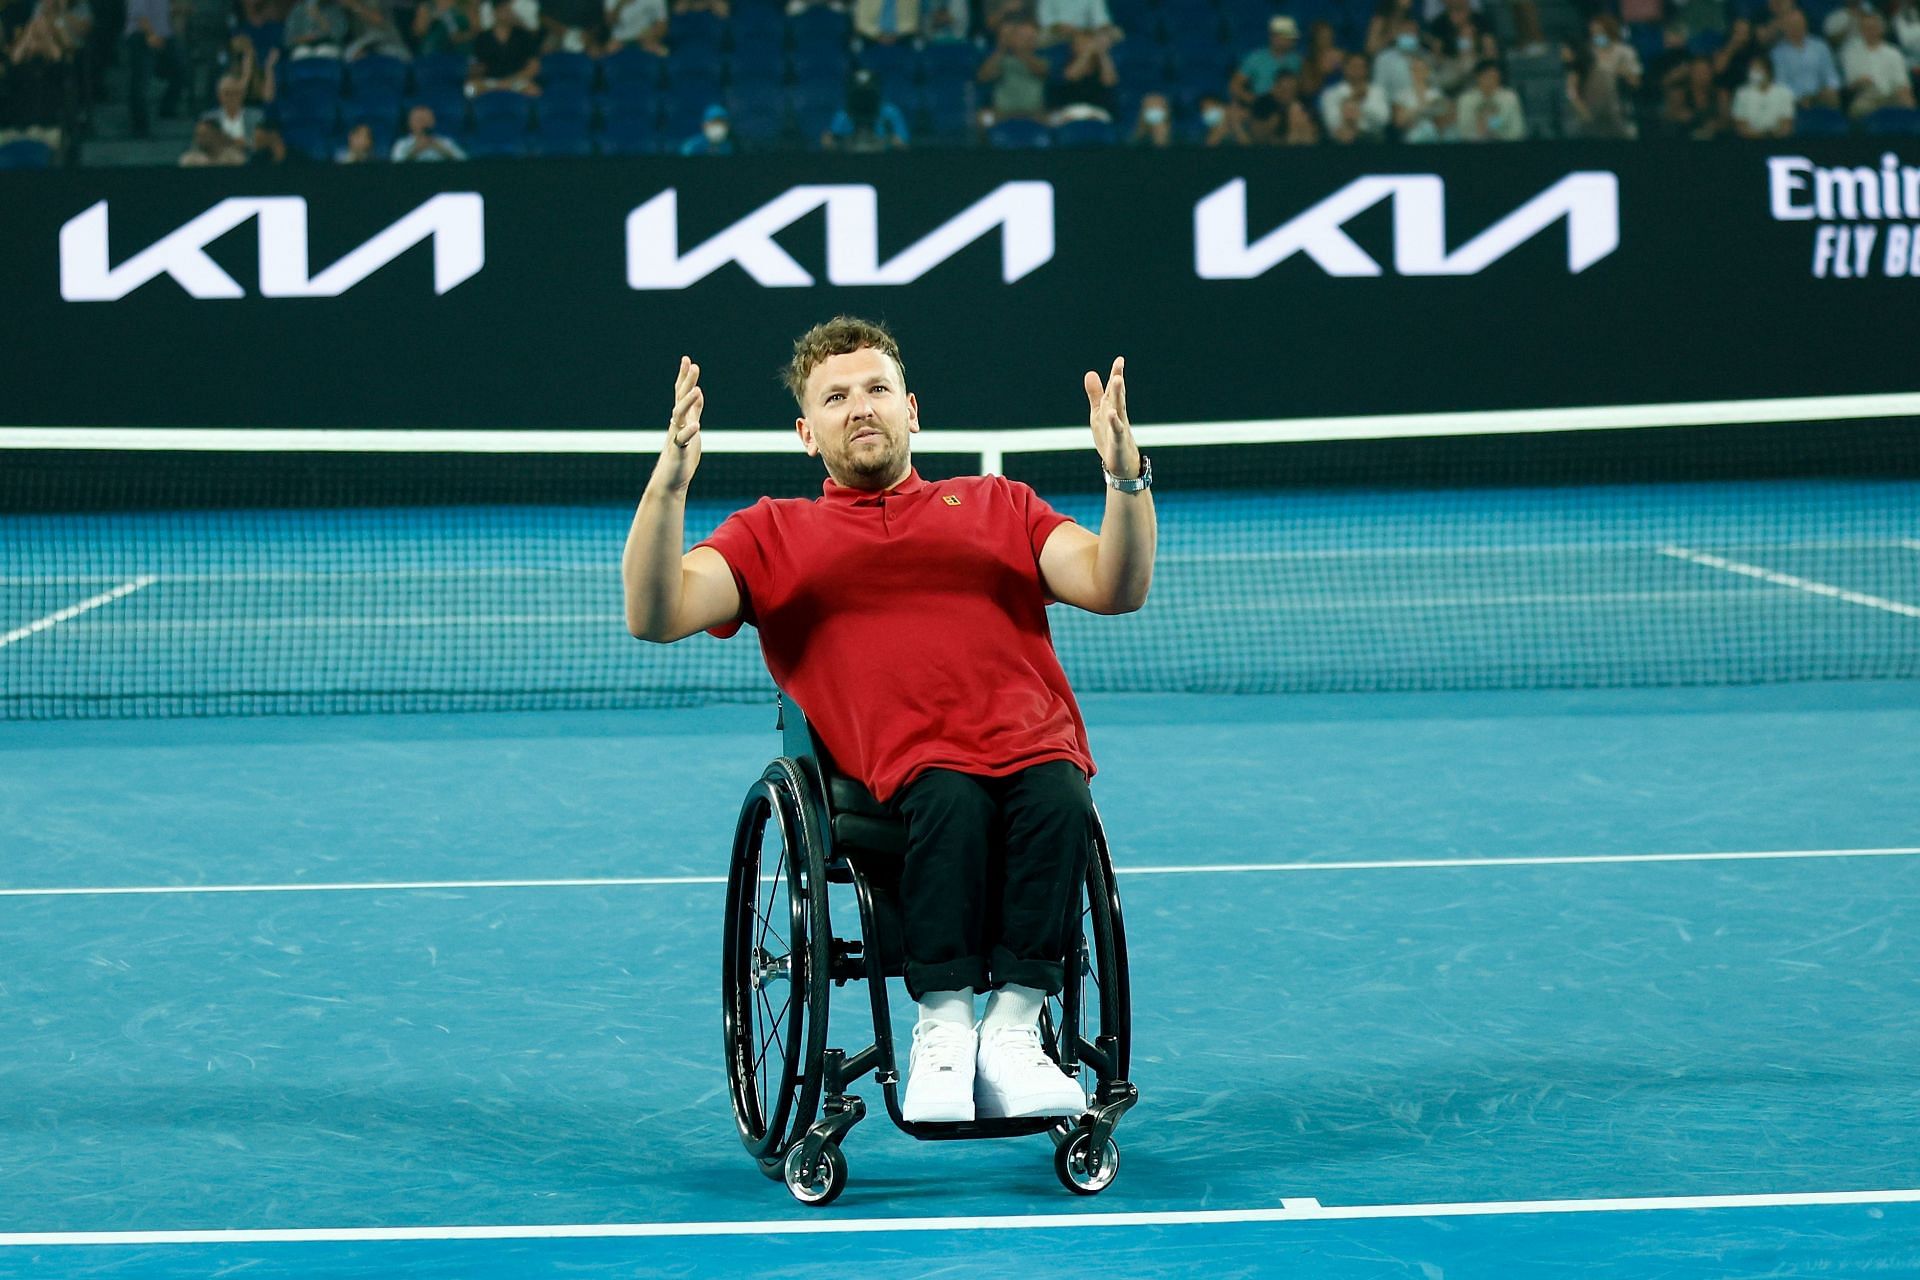 Dylan Alcott hit out at the prize money differences between wheelchair tennis and able-bodied tennis